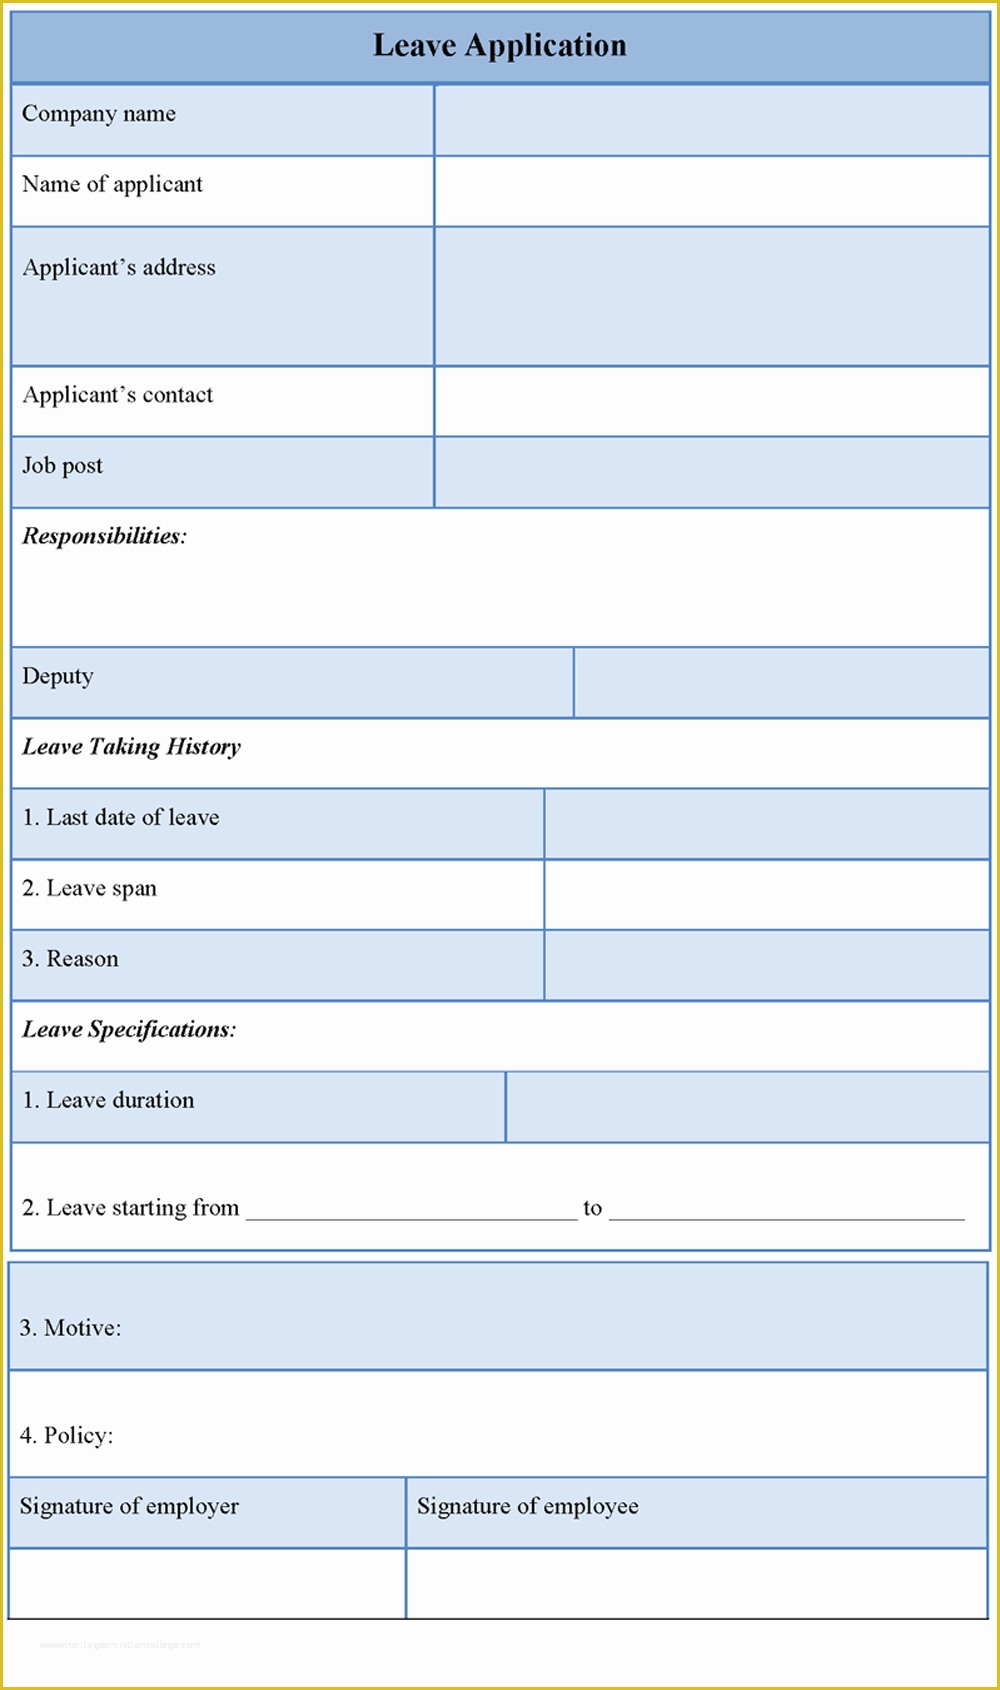 Leave Application form Template Free Download Of Application Template for Leave Example Of Leave